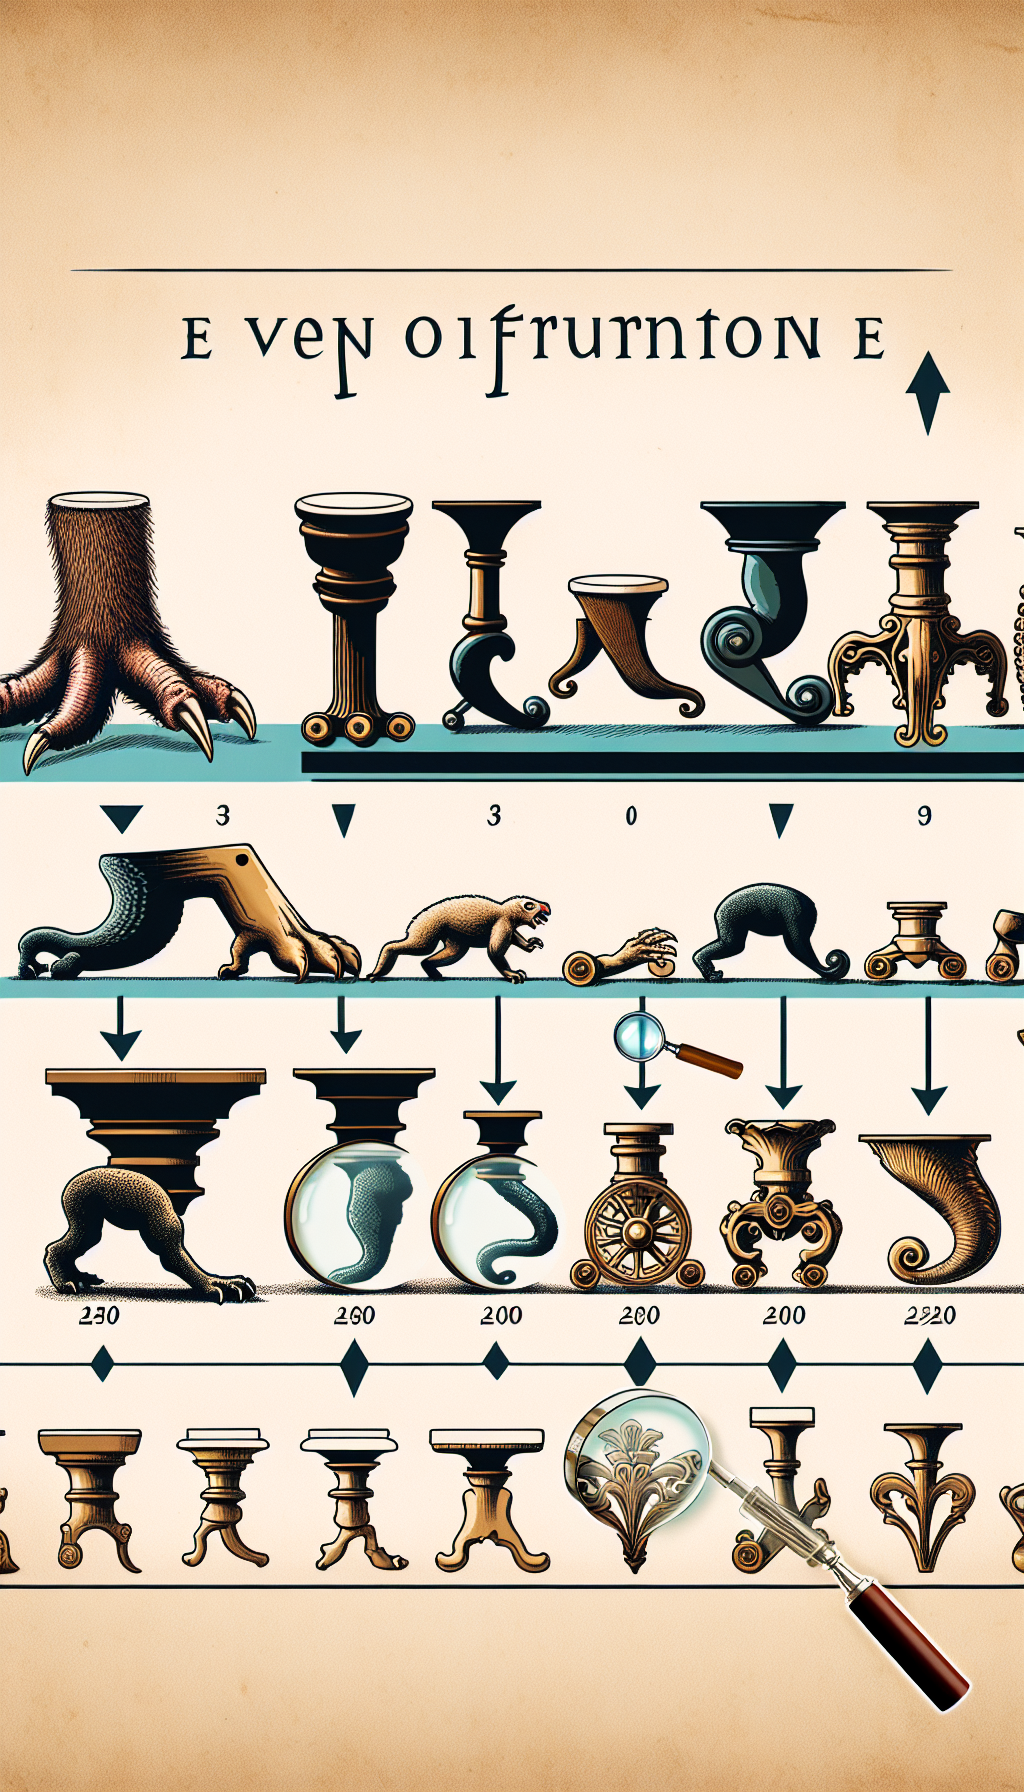 An illustration depicts a whimsical evolutionary timeline winding from a beastly claw foot morphing into elegant castor wheels, with each distinctive style labeled with a tiny, stylized calendar icon indicative of its historical period. A magnifying glass hovers over the timeline, underscoring the idea of scrutinizing details to date and identify antique table legs.